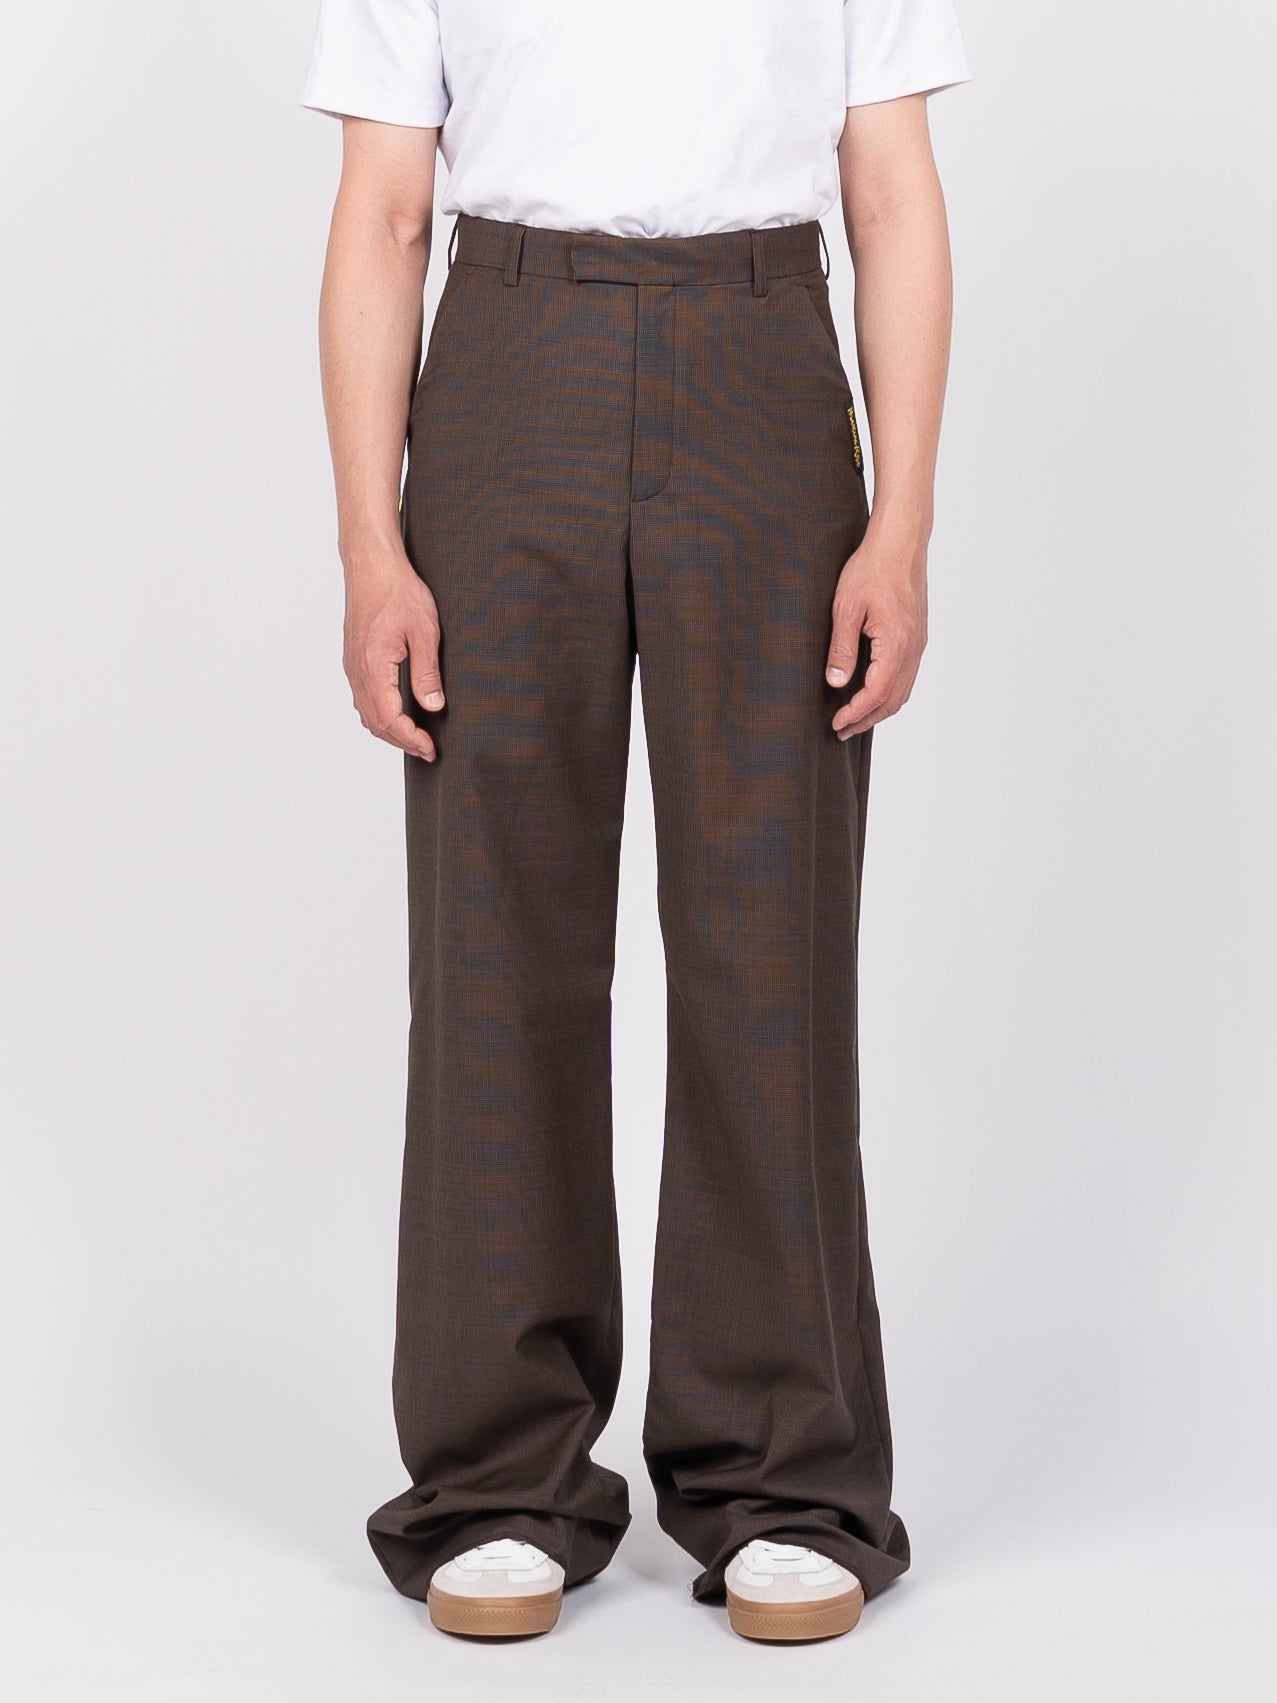 Martine Rose Tailored Extended Wide Leg Trouser (Brown Houndstooth)